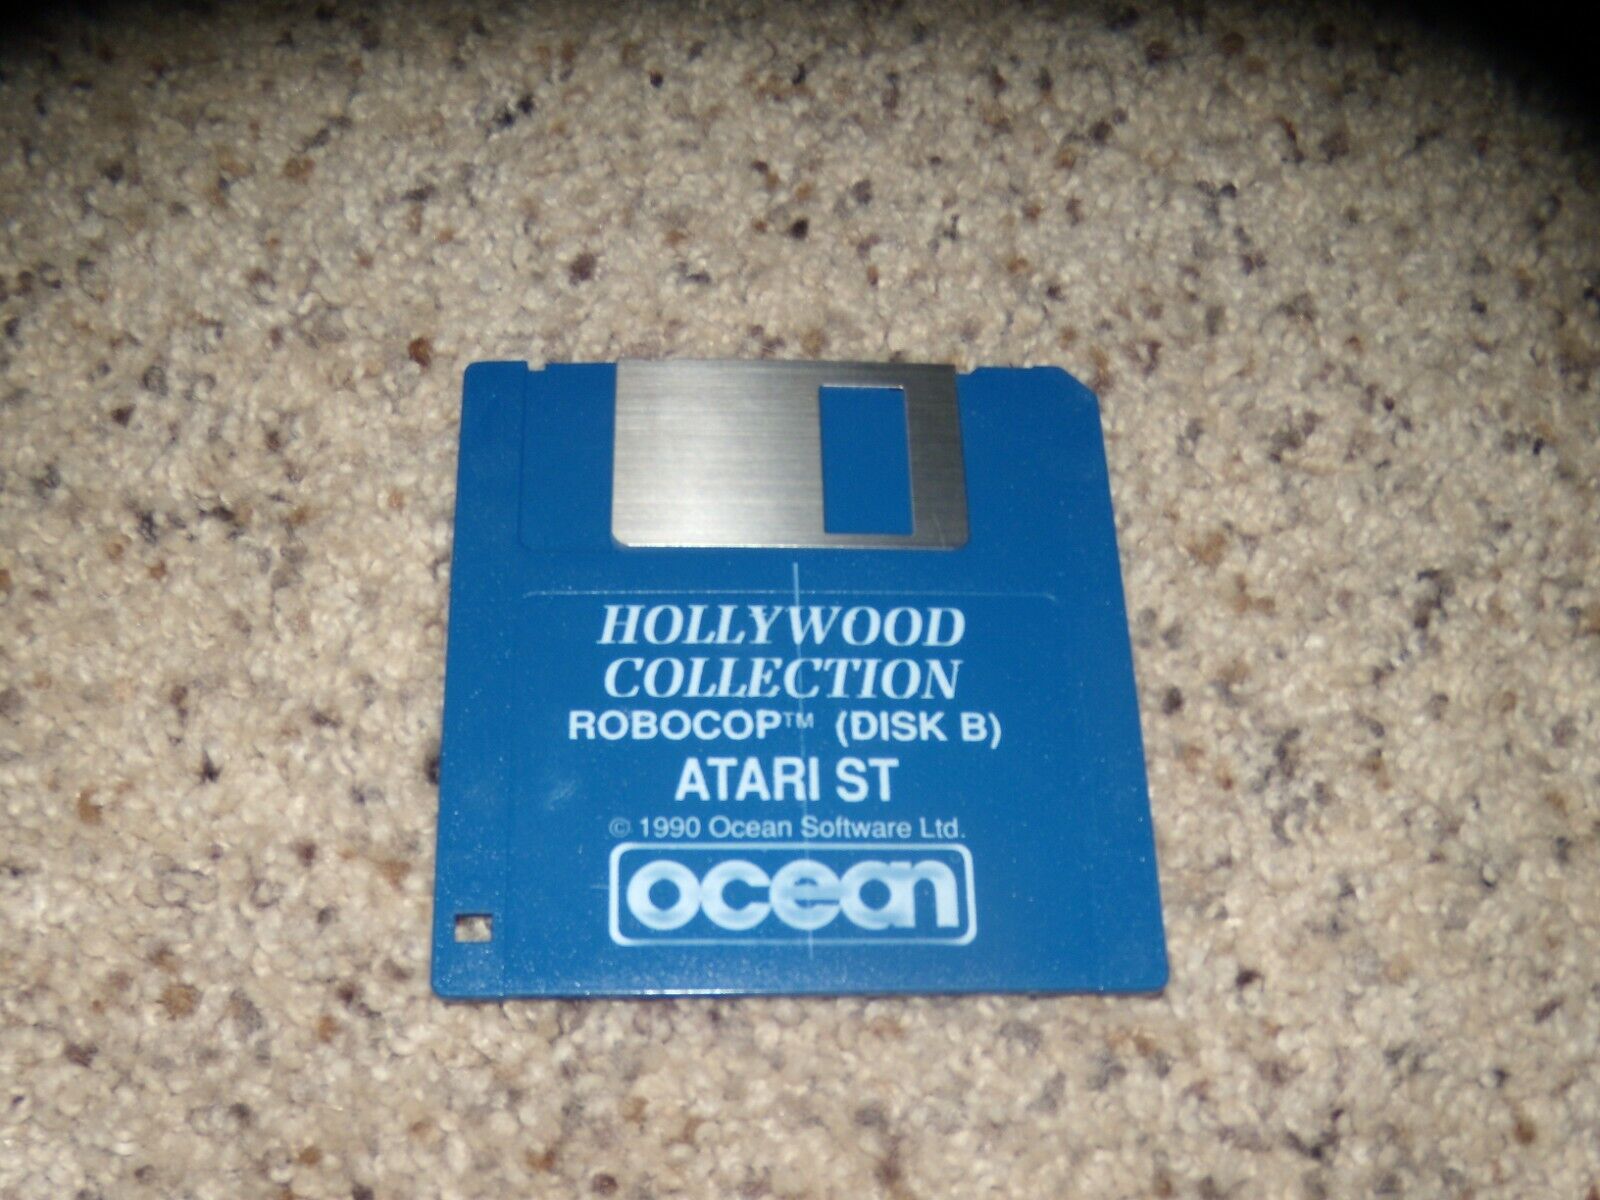 Hollywood Collection: Robocop Game for the Atari ST on 3.5\